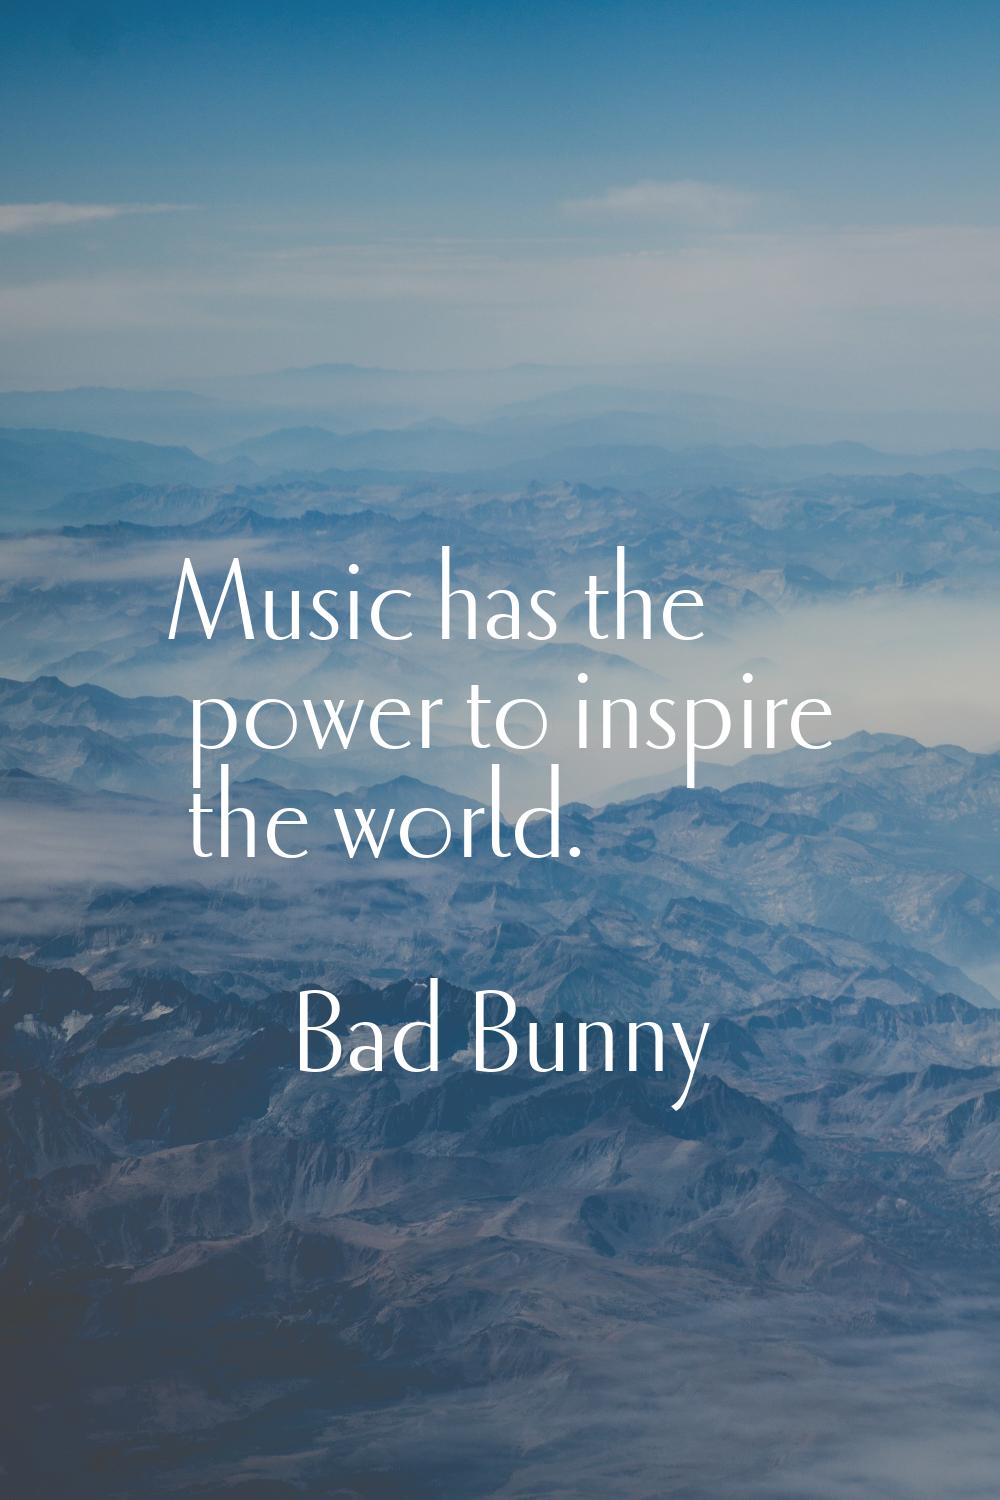 Music has the power to inspire the world.